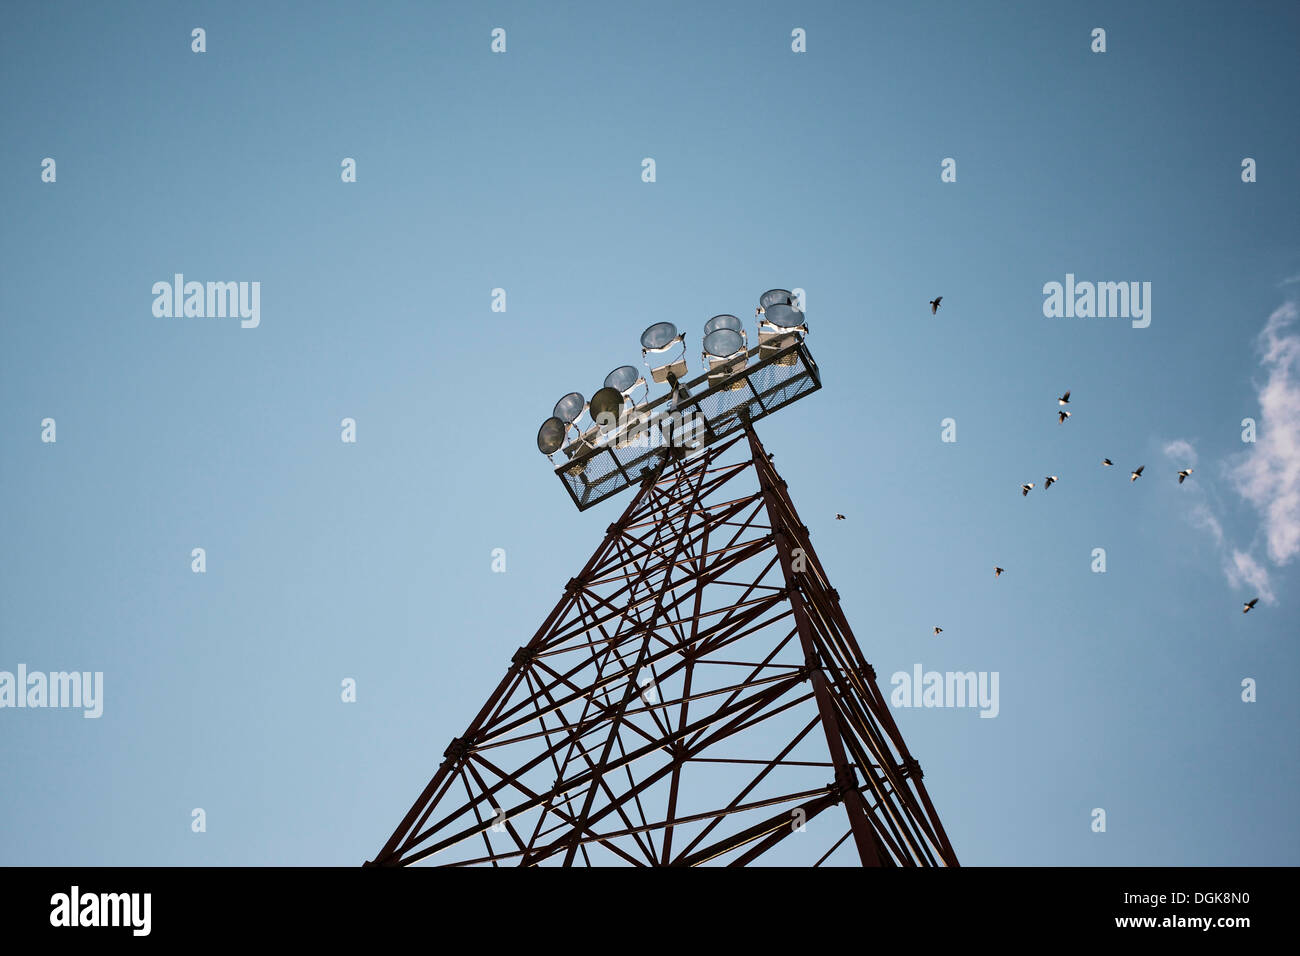 Floodlight tower from low angle view Stock Photo